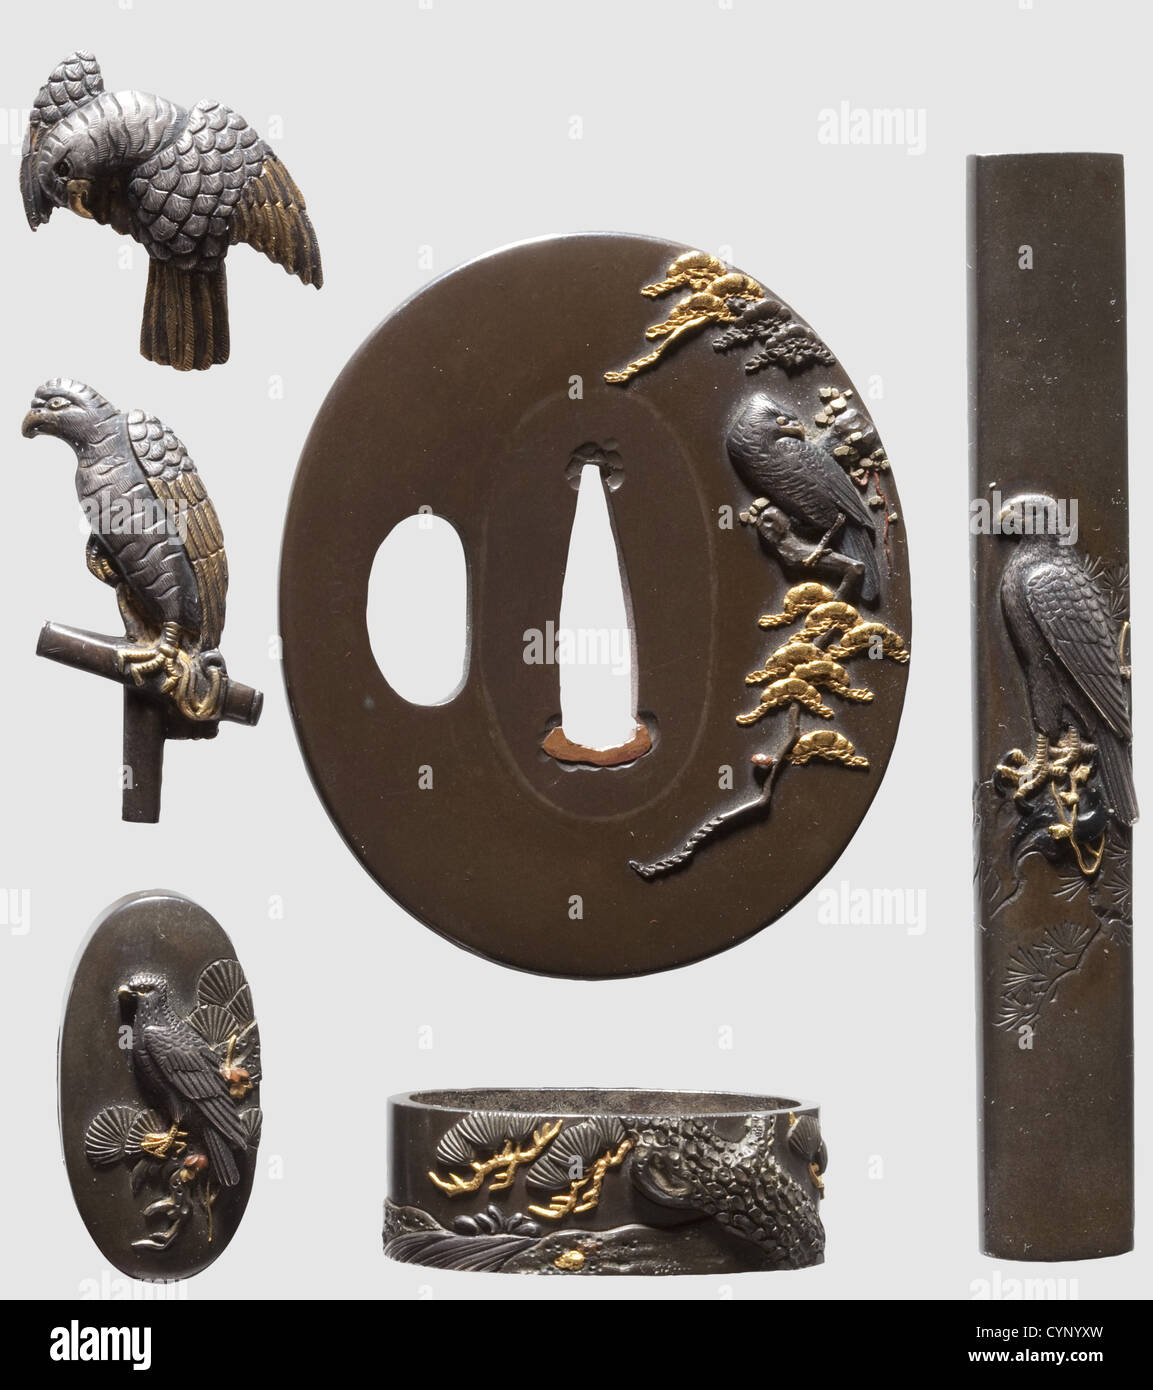 A kodogu,Japan,late Edo period. Set of sword fittings of shibuichi,consisting of tsuba,fuchi and kashira,menuki,and kozuka. All parts bearing the colour image of a hawk in high relief(takabori). The details with vivid gold and silver inlays. Tsuba mumei,fuchi inscribed 'Tsunenao',the kozuka 'Ganshoshi Nagatsune'. In a wooden transportation box. Diameter of tsuba 6.4 cm,length of the kozuka 9.6 cm,historic,historical,19th century,Japanese,Asian,Asia,Far East,object,objects,stills,clipping,clippings,cut out,cut-out,cut-outs,fine arts,ar,Additional-Rights-Clearences-Not Available Stock Photo